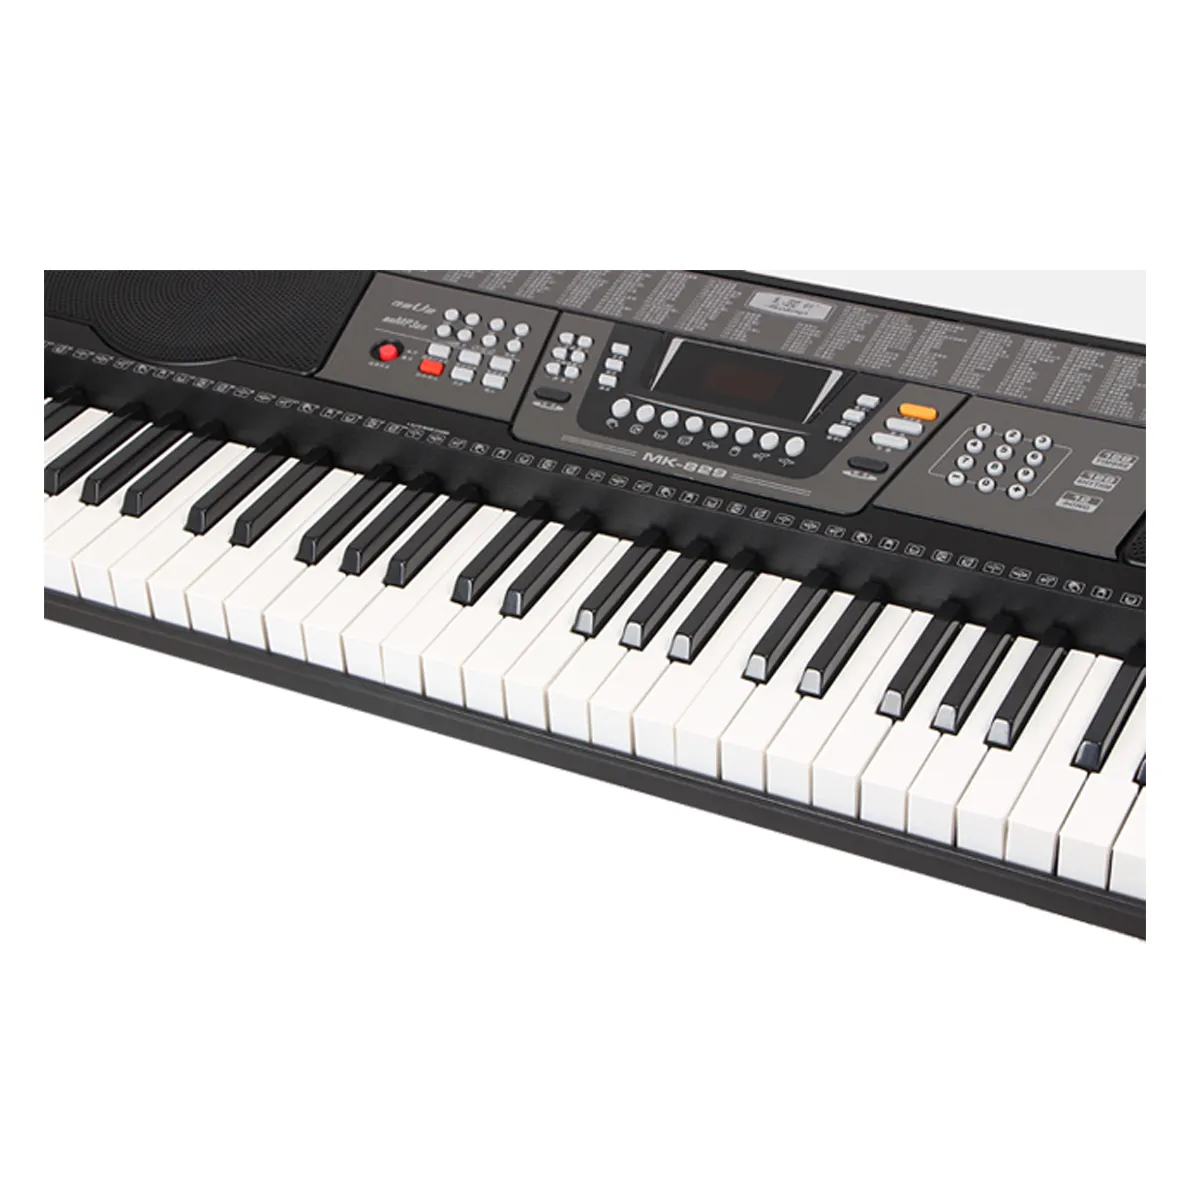 Hot Sale Product 128 Rhythms Keyboards Music Instrument Electronic Piano